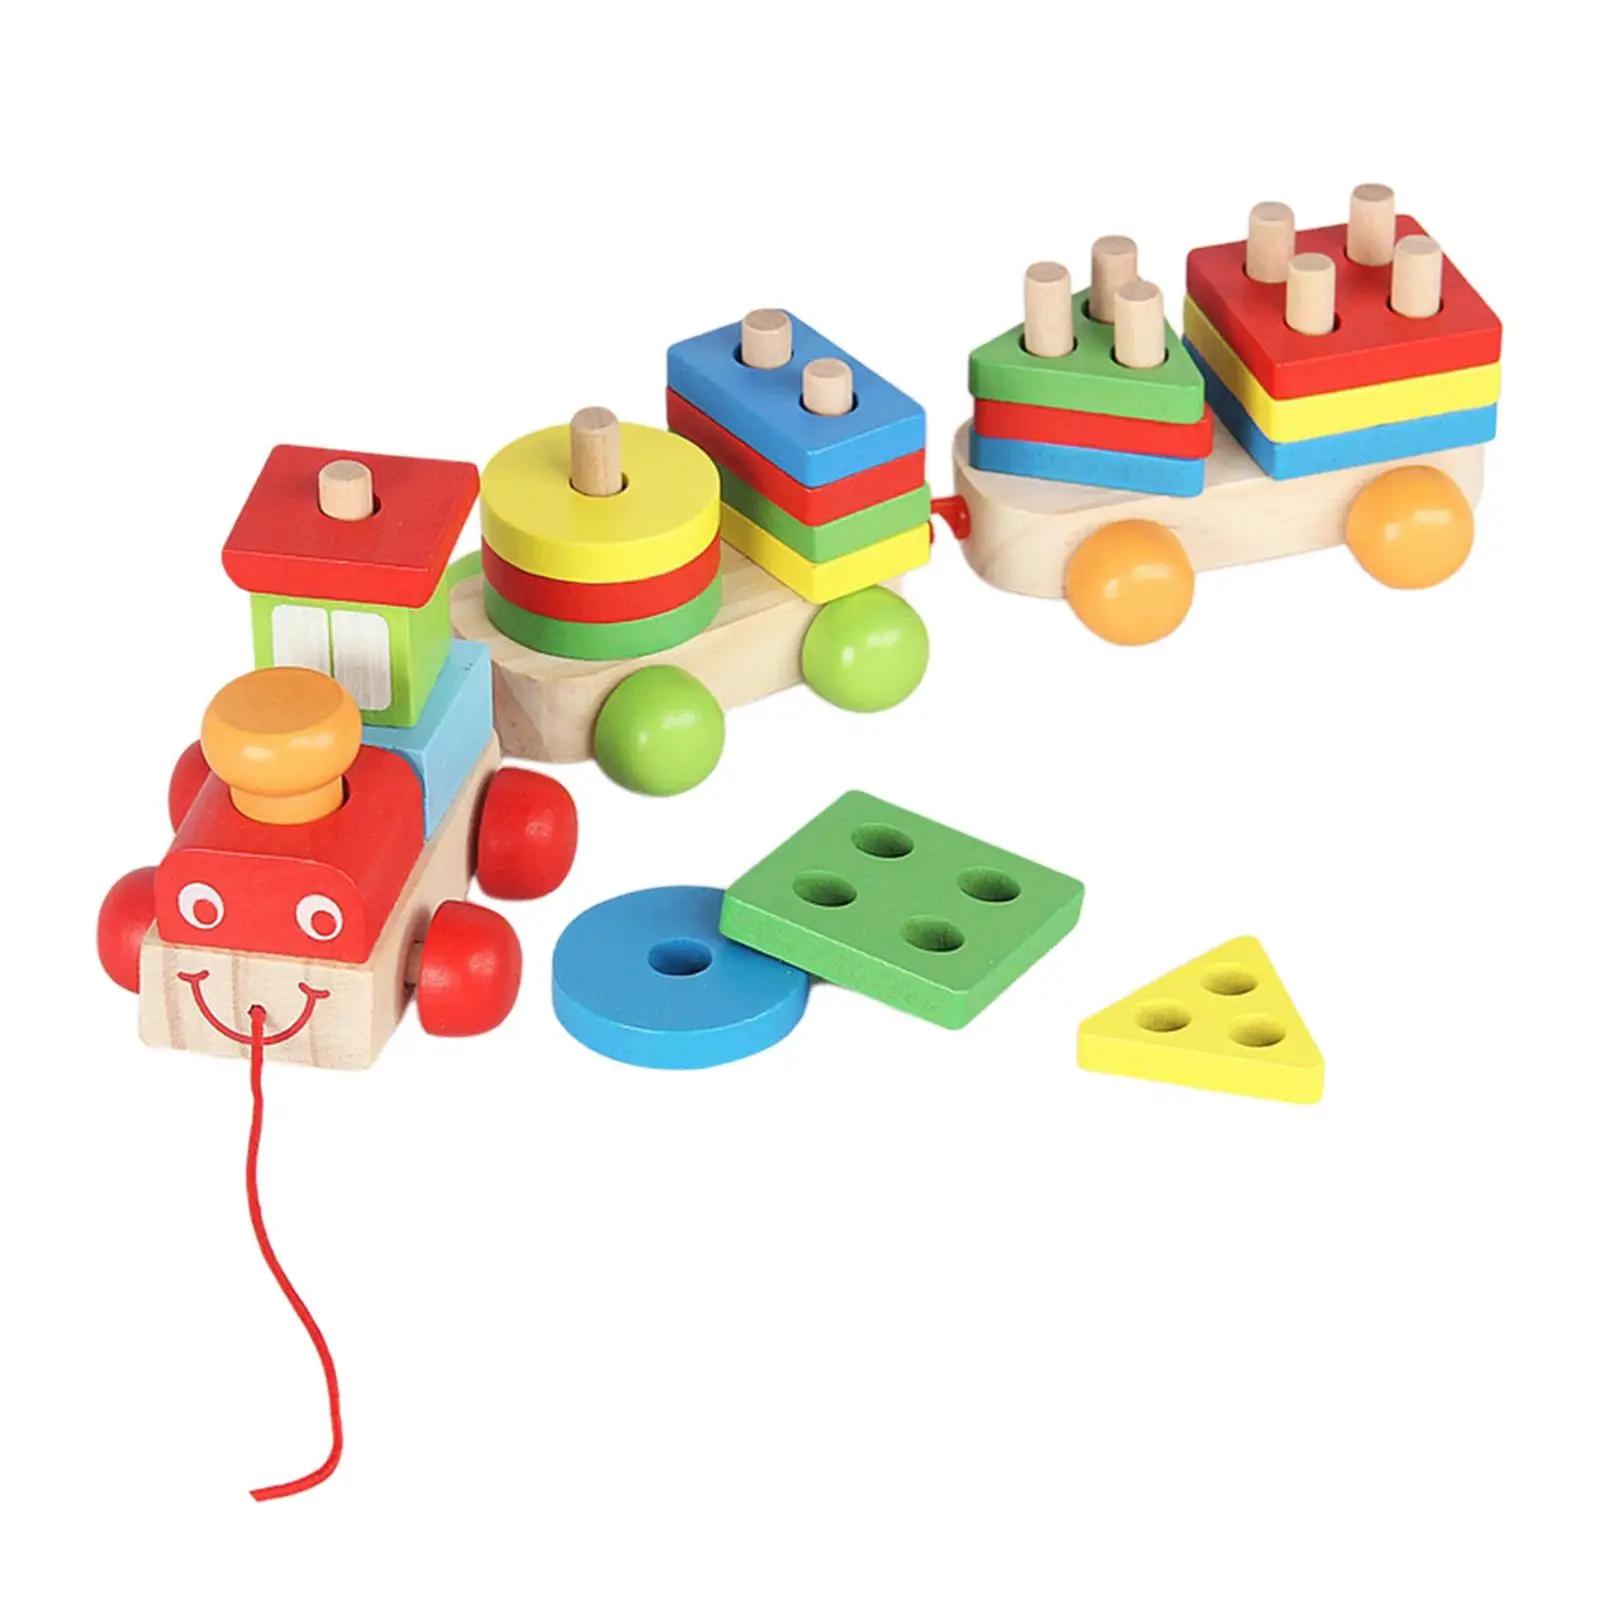 Creative Train Montessori Toys Intelligence Toy Shape Color Recognition Blocks for Boy Preschool Children Toddlers Holiday Gifts